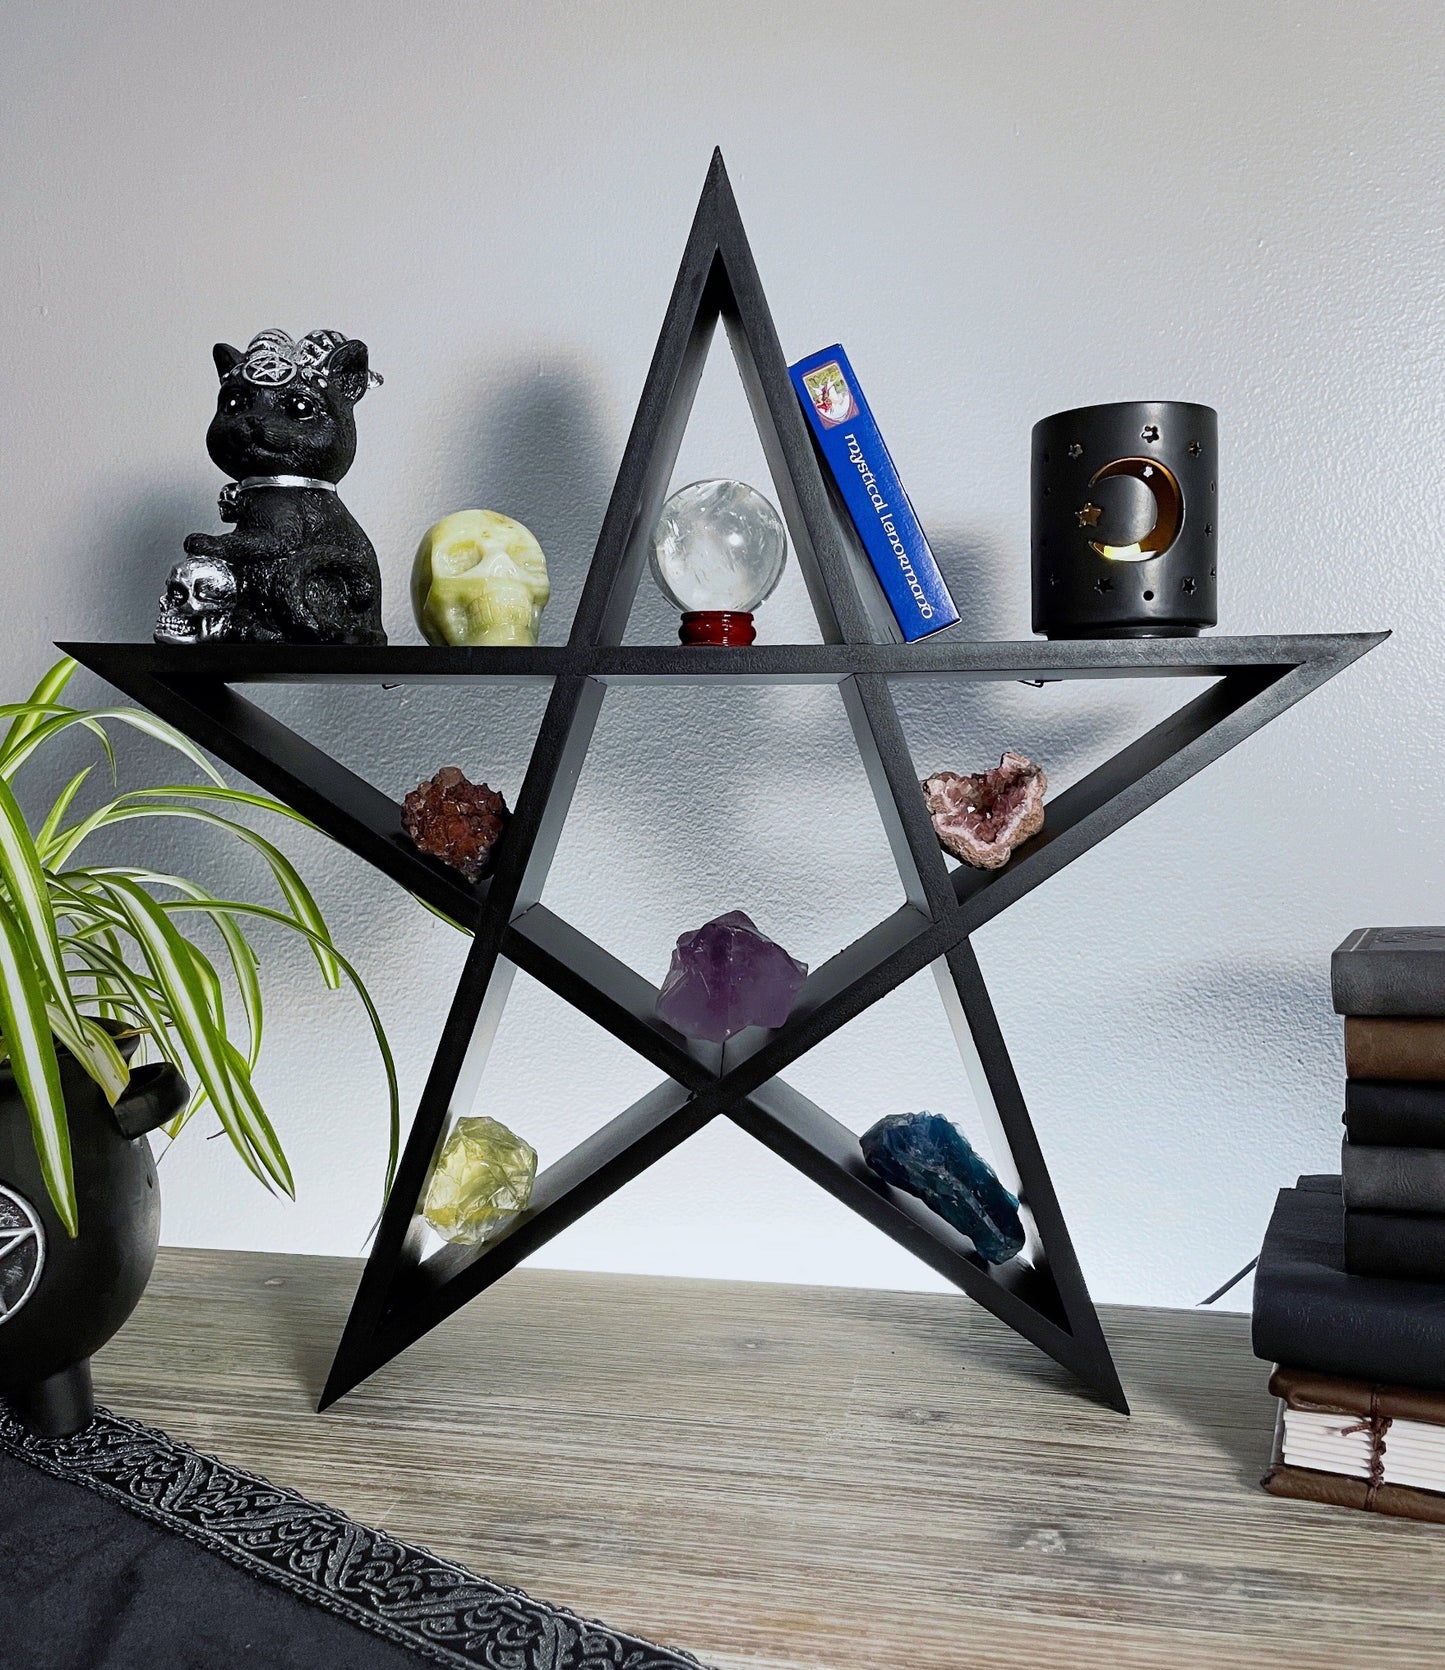 Pictured is a shelving unit shaped like a pentagram